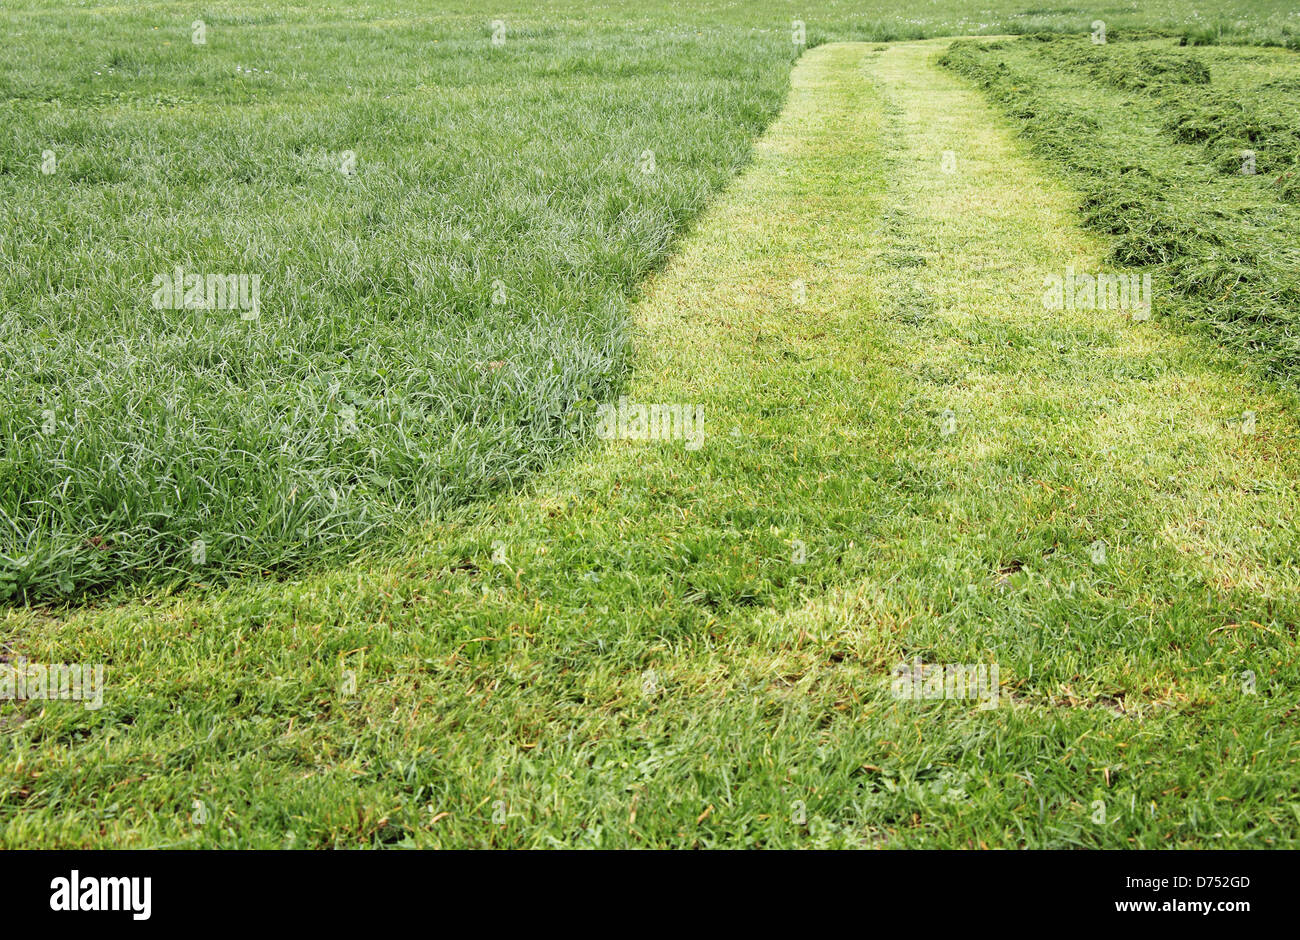 Track cut grass on the lawn, after passing mowers Stock Photo